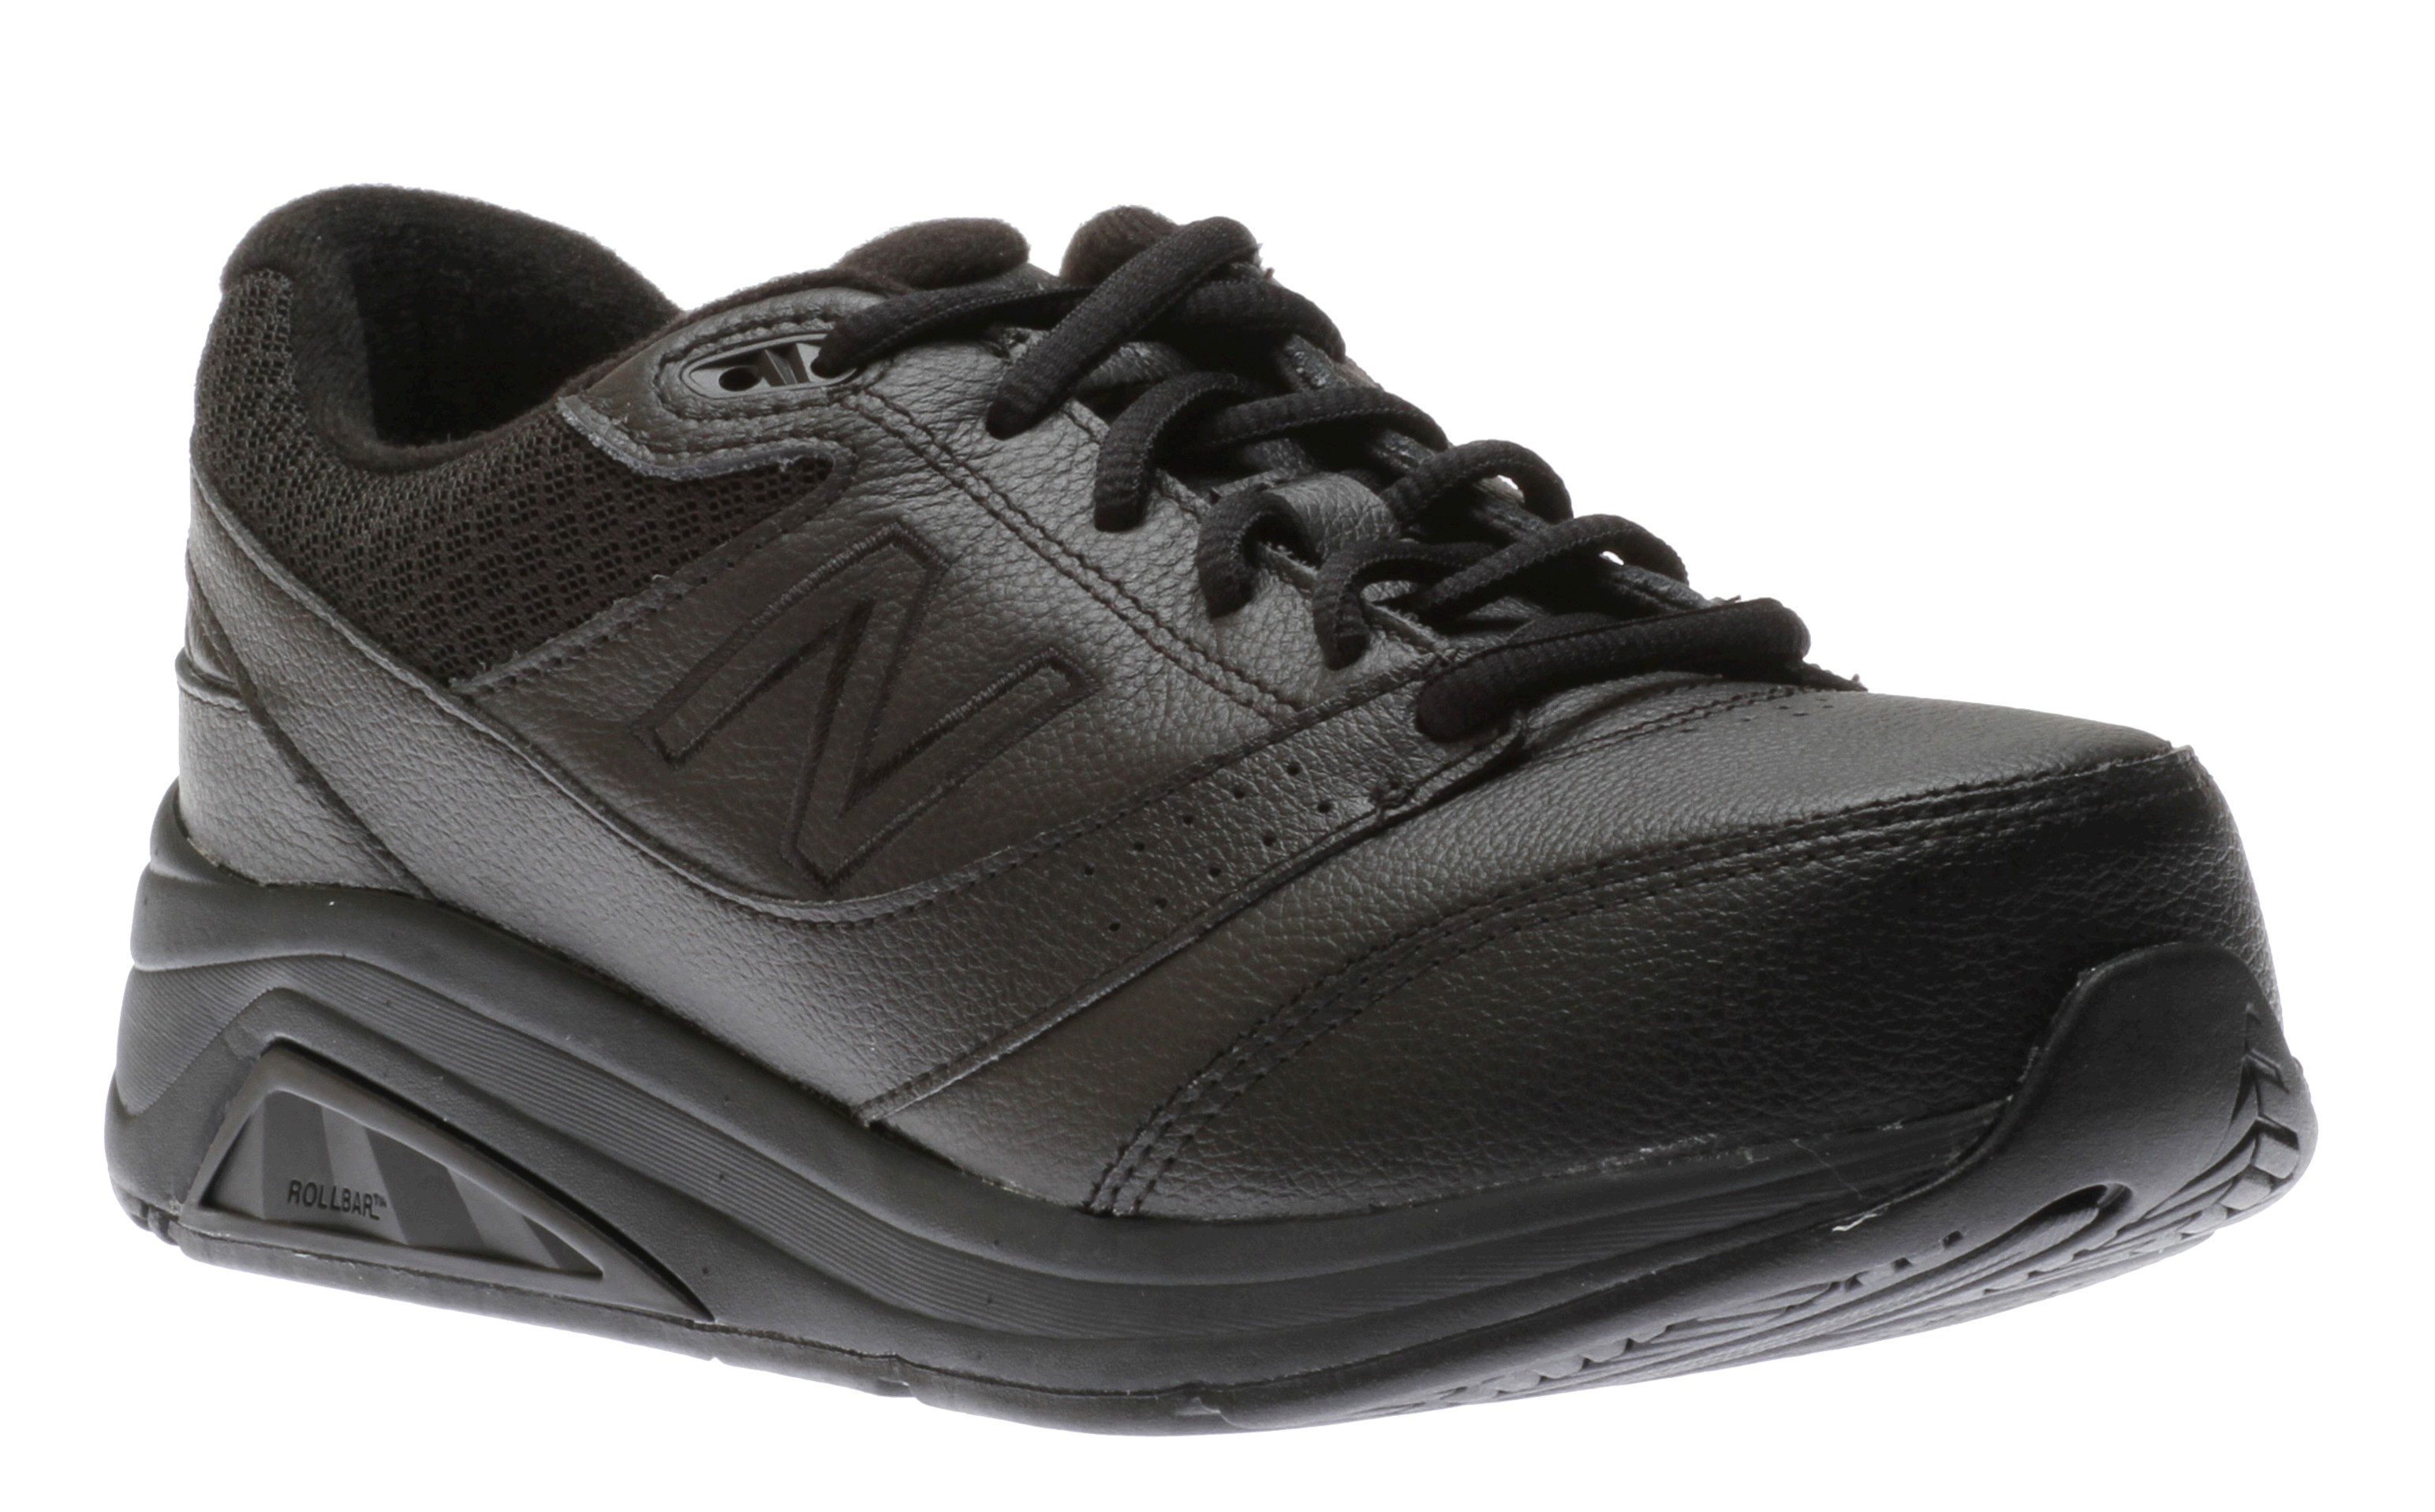 New Balance Womens Athletic Shoes in Black Color, Size 10.5 GLH | eBay